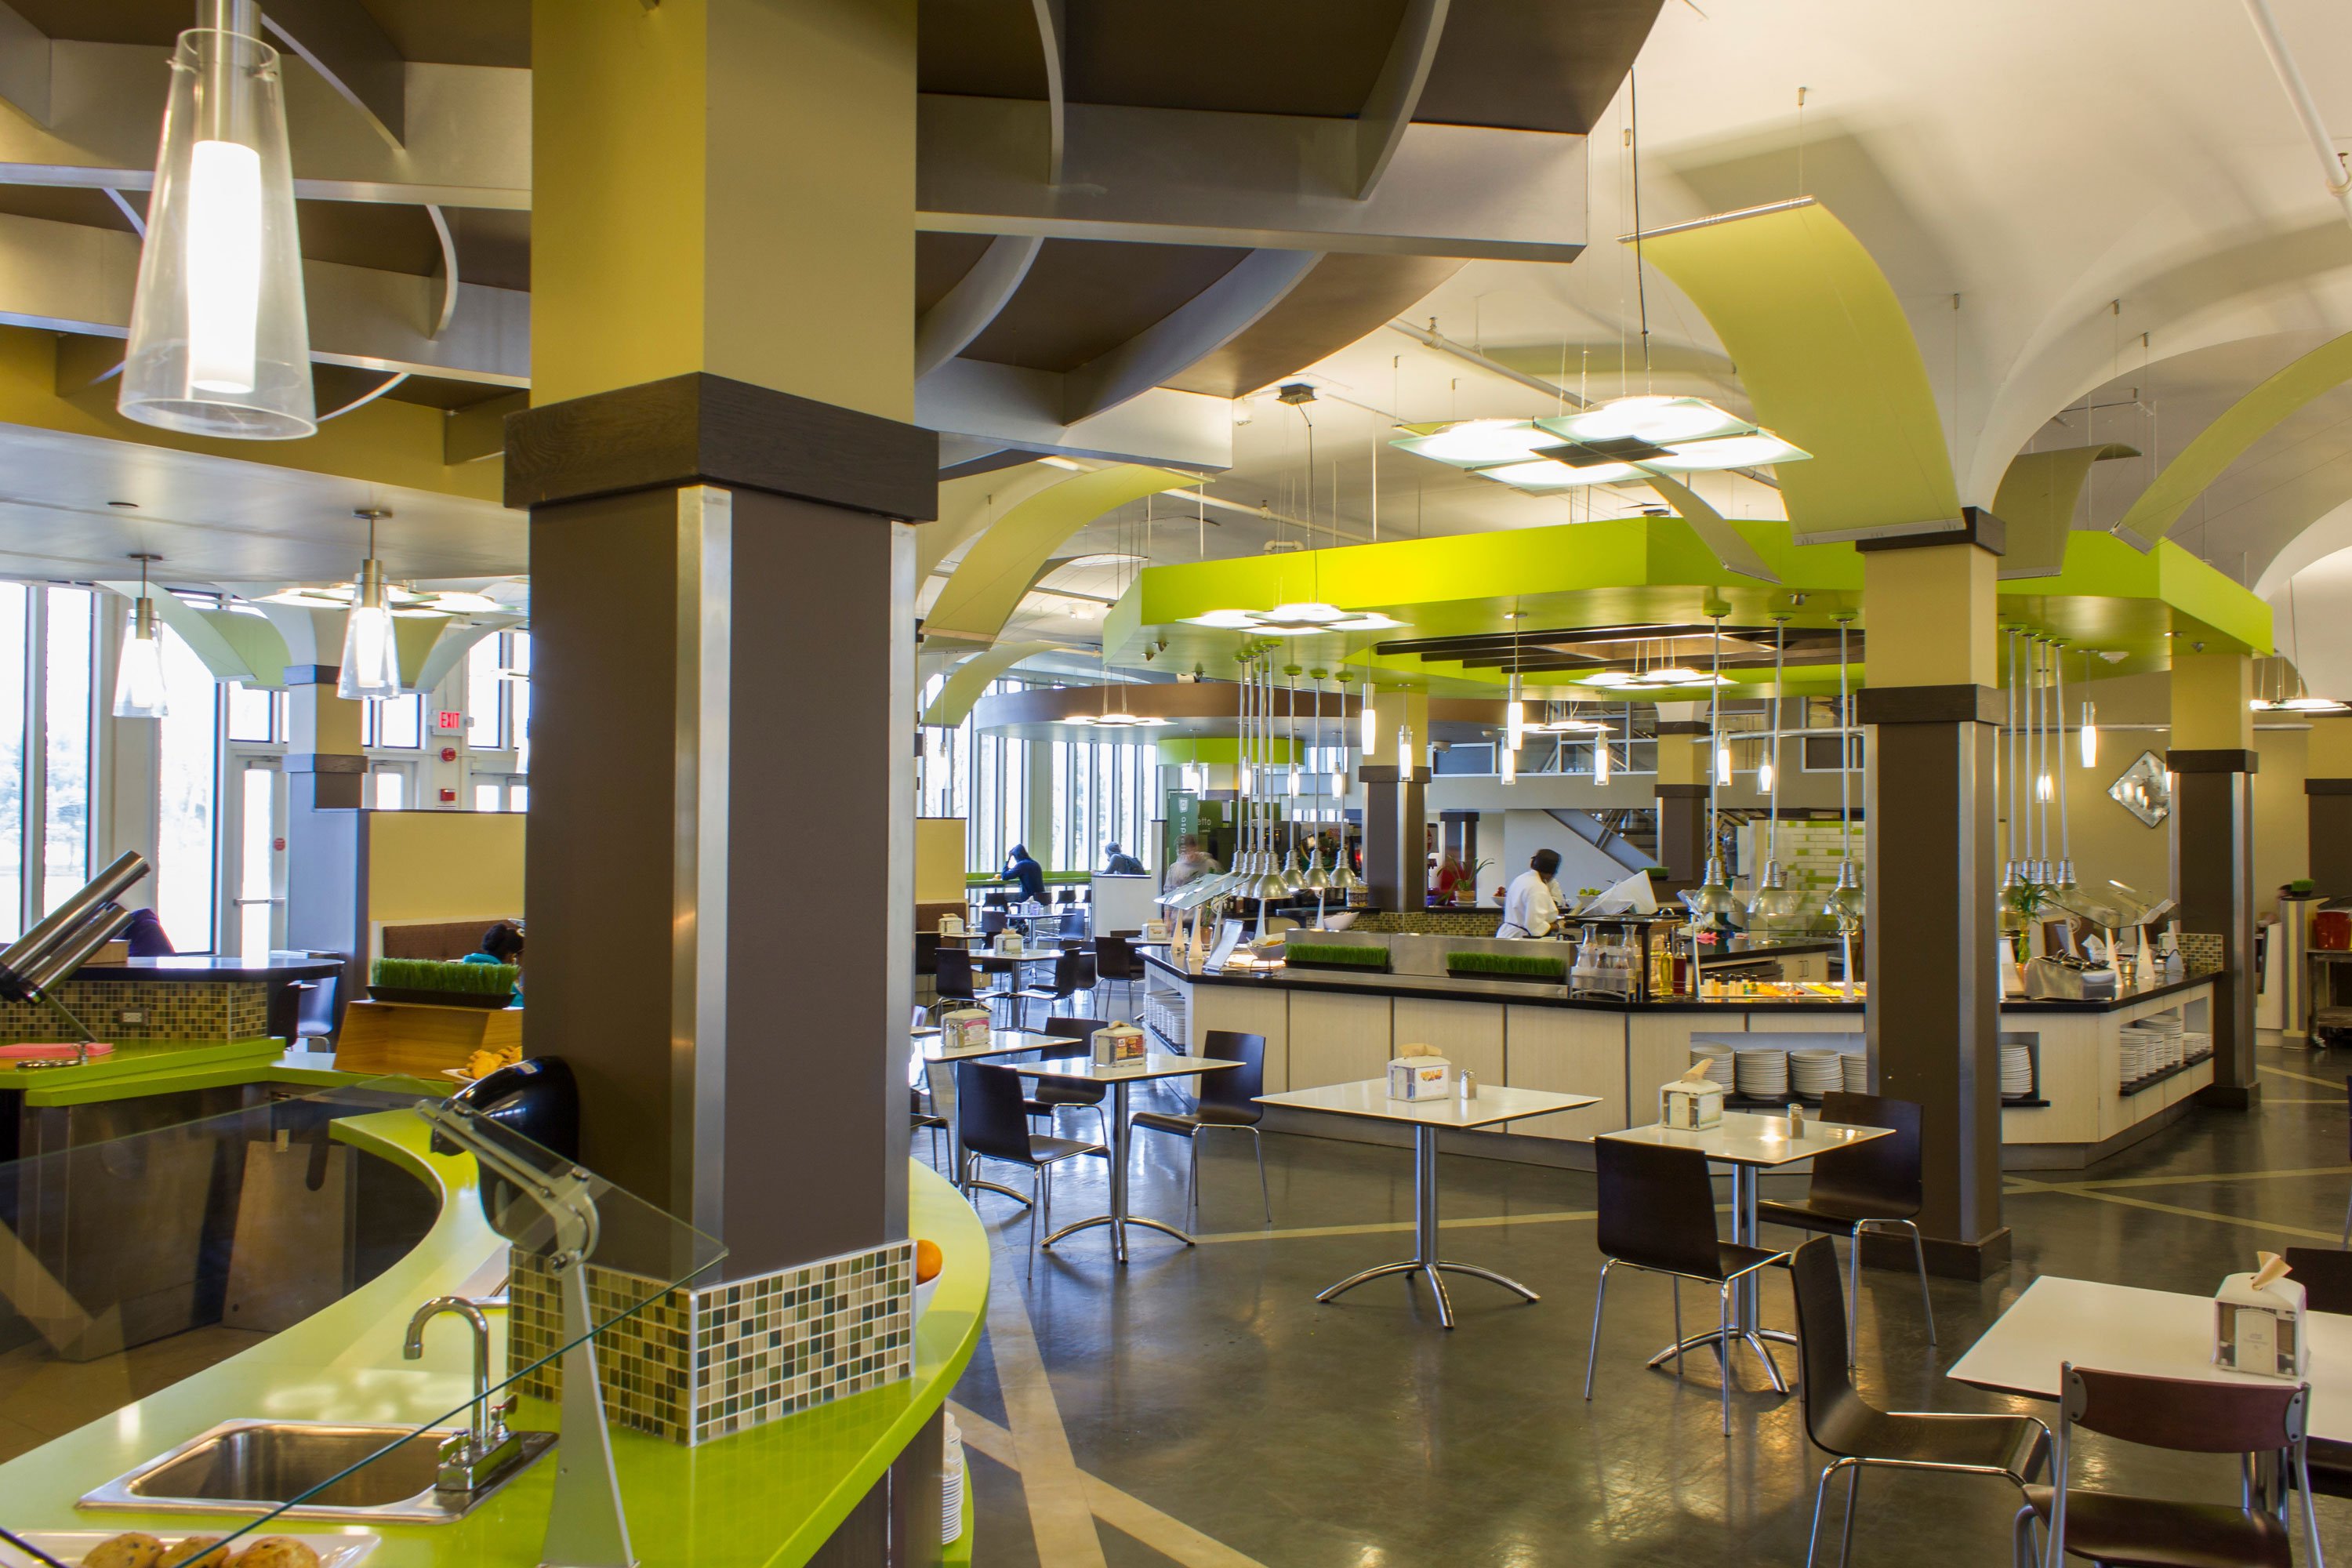 State Quad Dining Hall, with green walls, food stations, tables and chairs